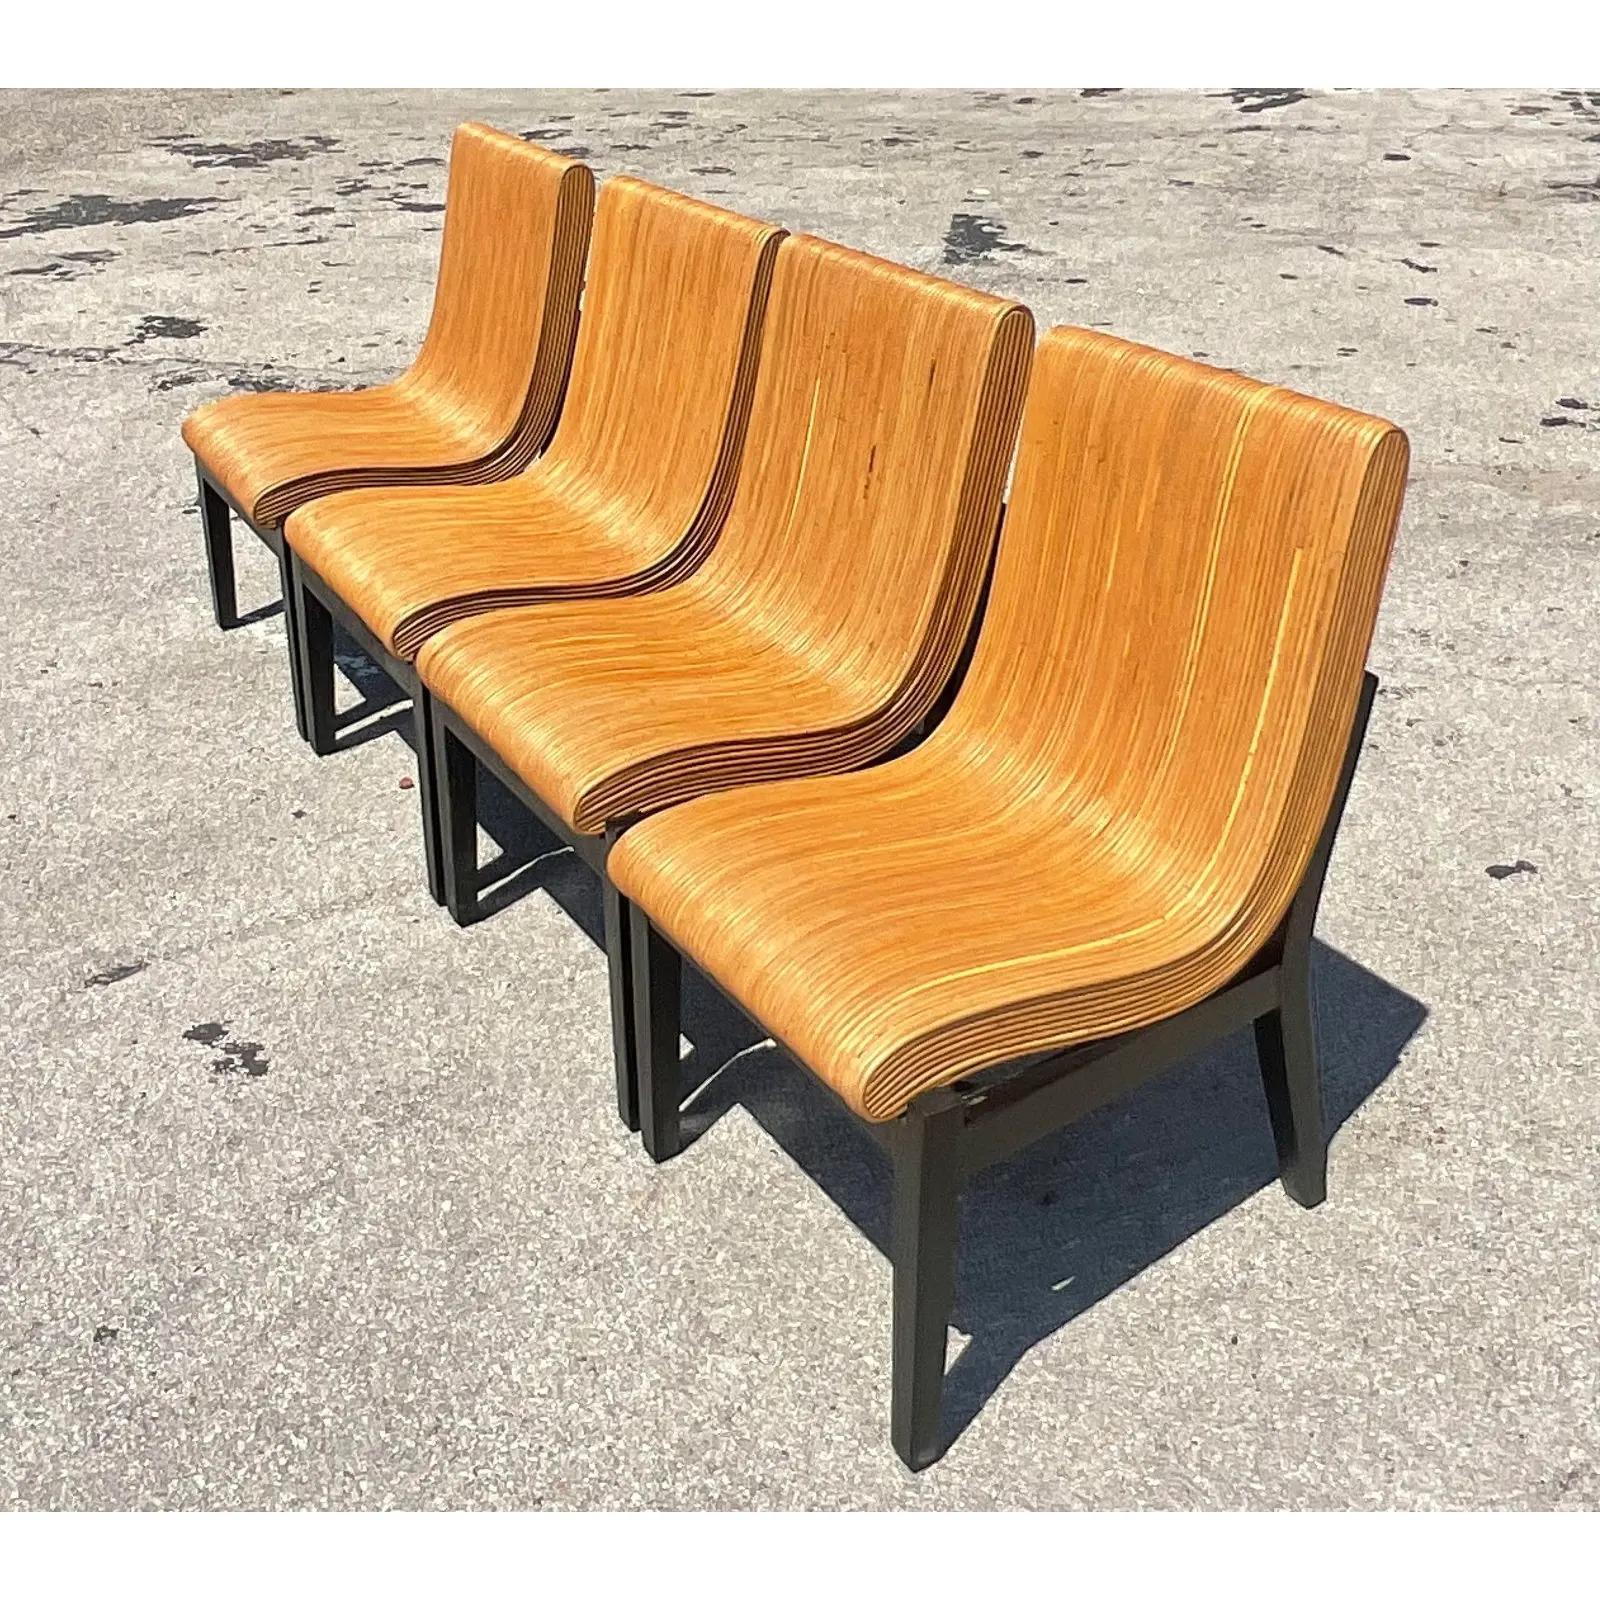 Fantastic set of four Coastal dining chairs. Beautiful pencil reed in a chic swoop design. The chair rest is in a contemporary wooden frame. Acquired from a Palm Beach estate.